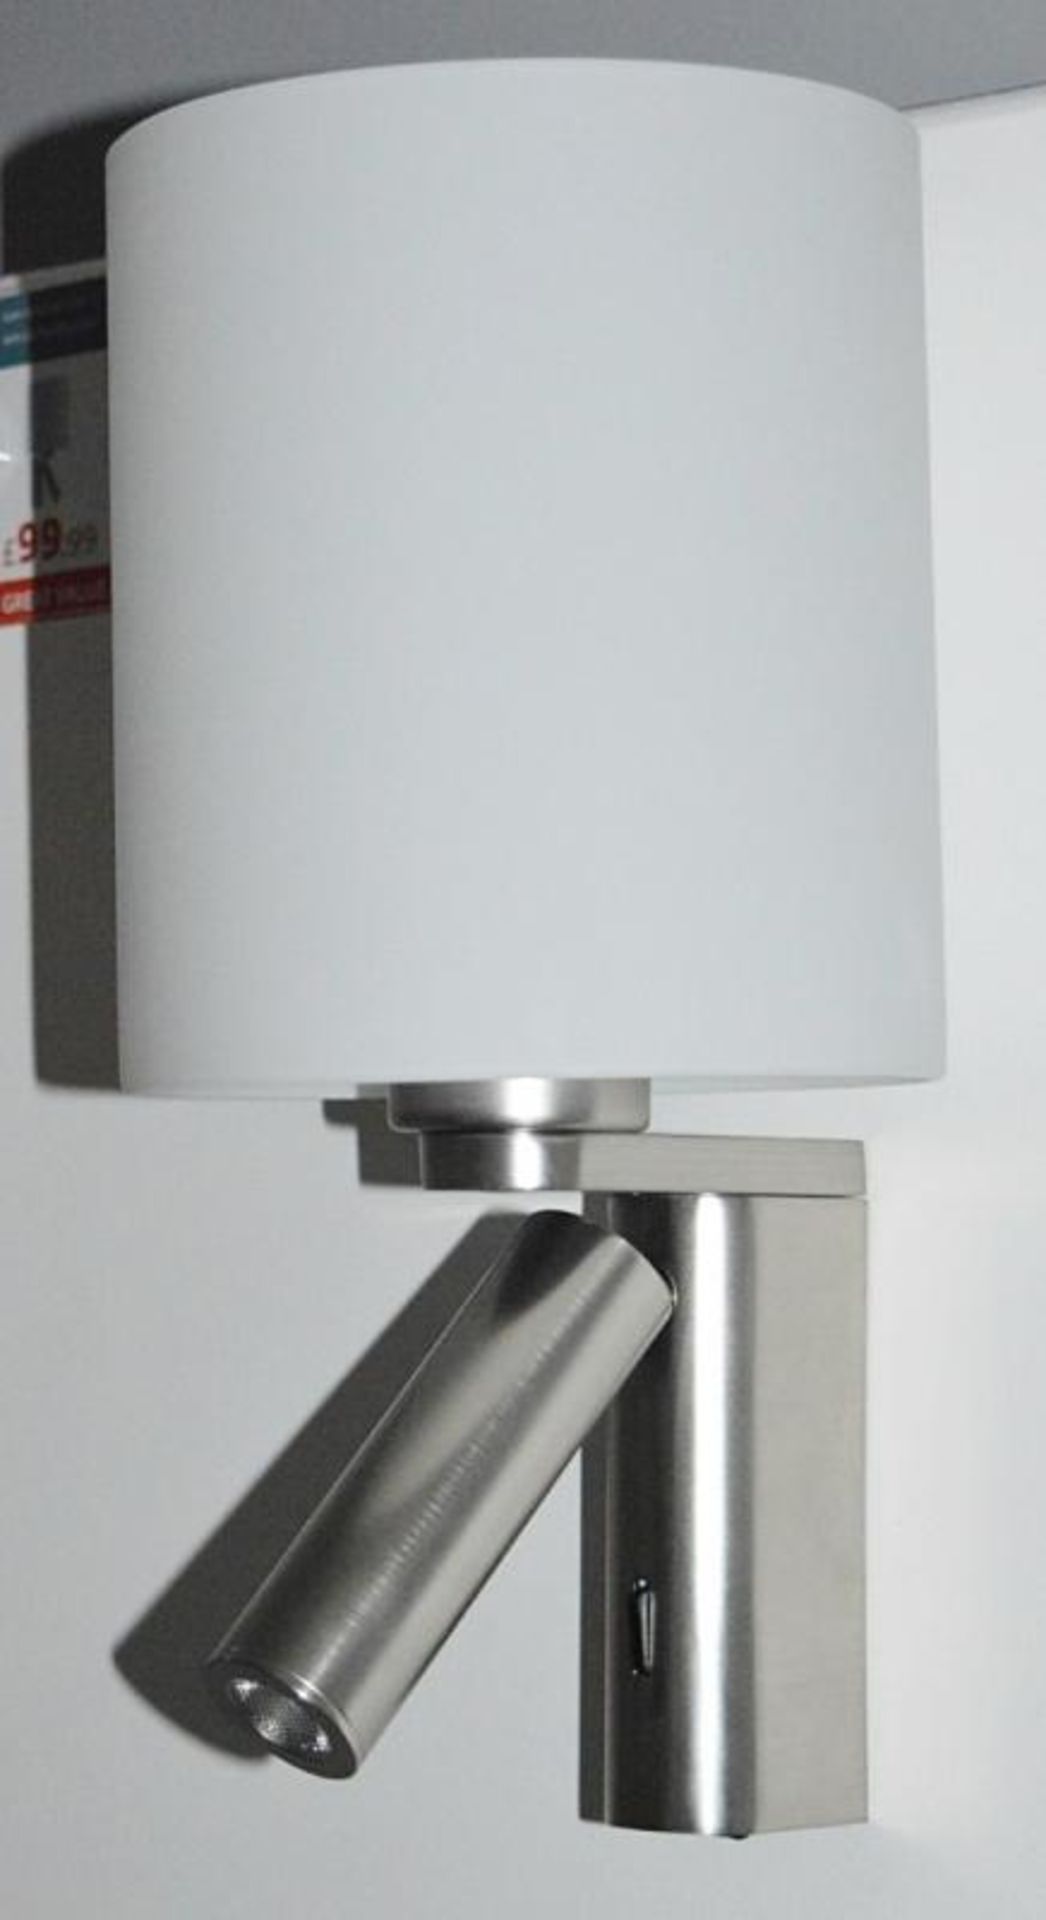 1 x Satin Silver Wall Light With LED Reading Light - Ex Display Stock - CL298 - Ref: J164 - Location - Image 2 of 2